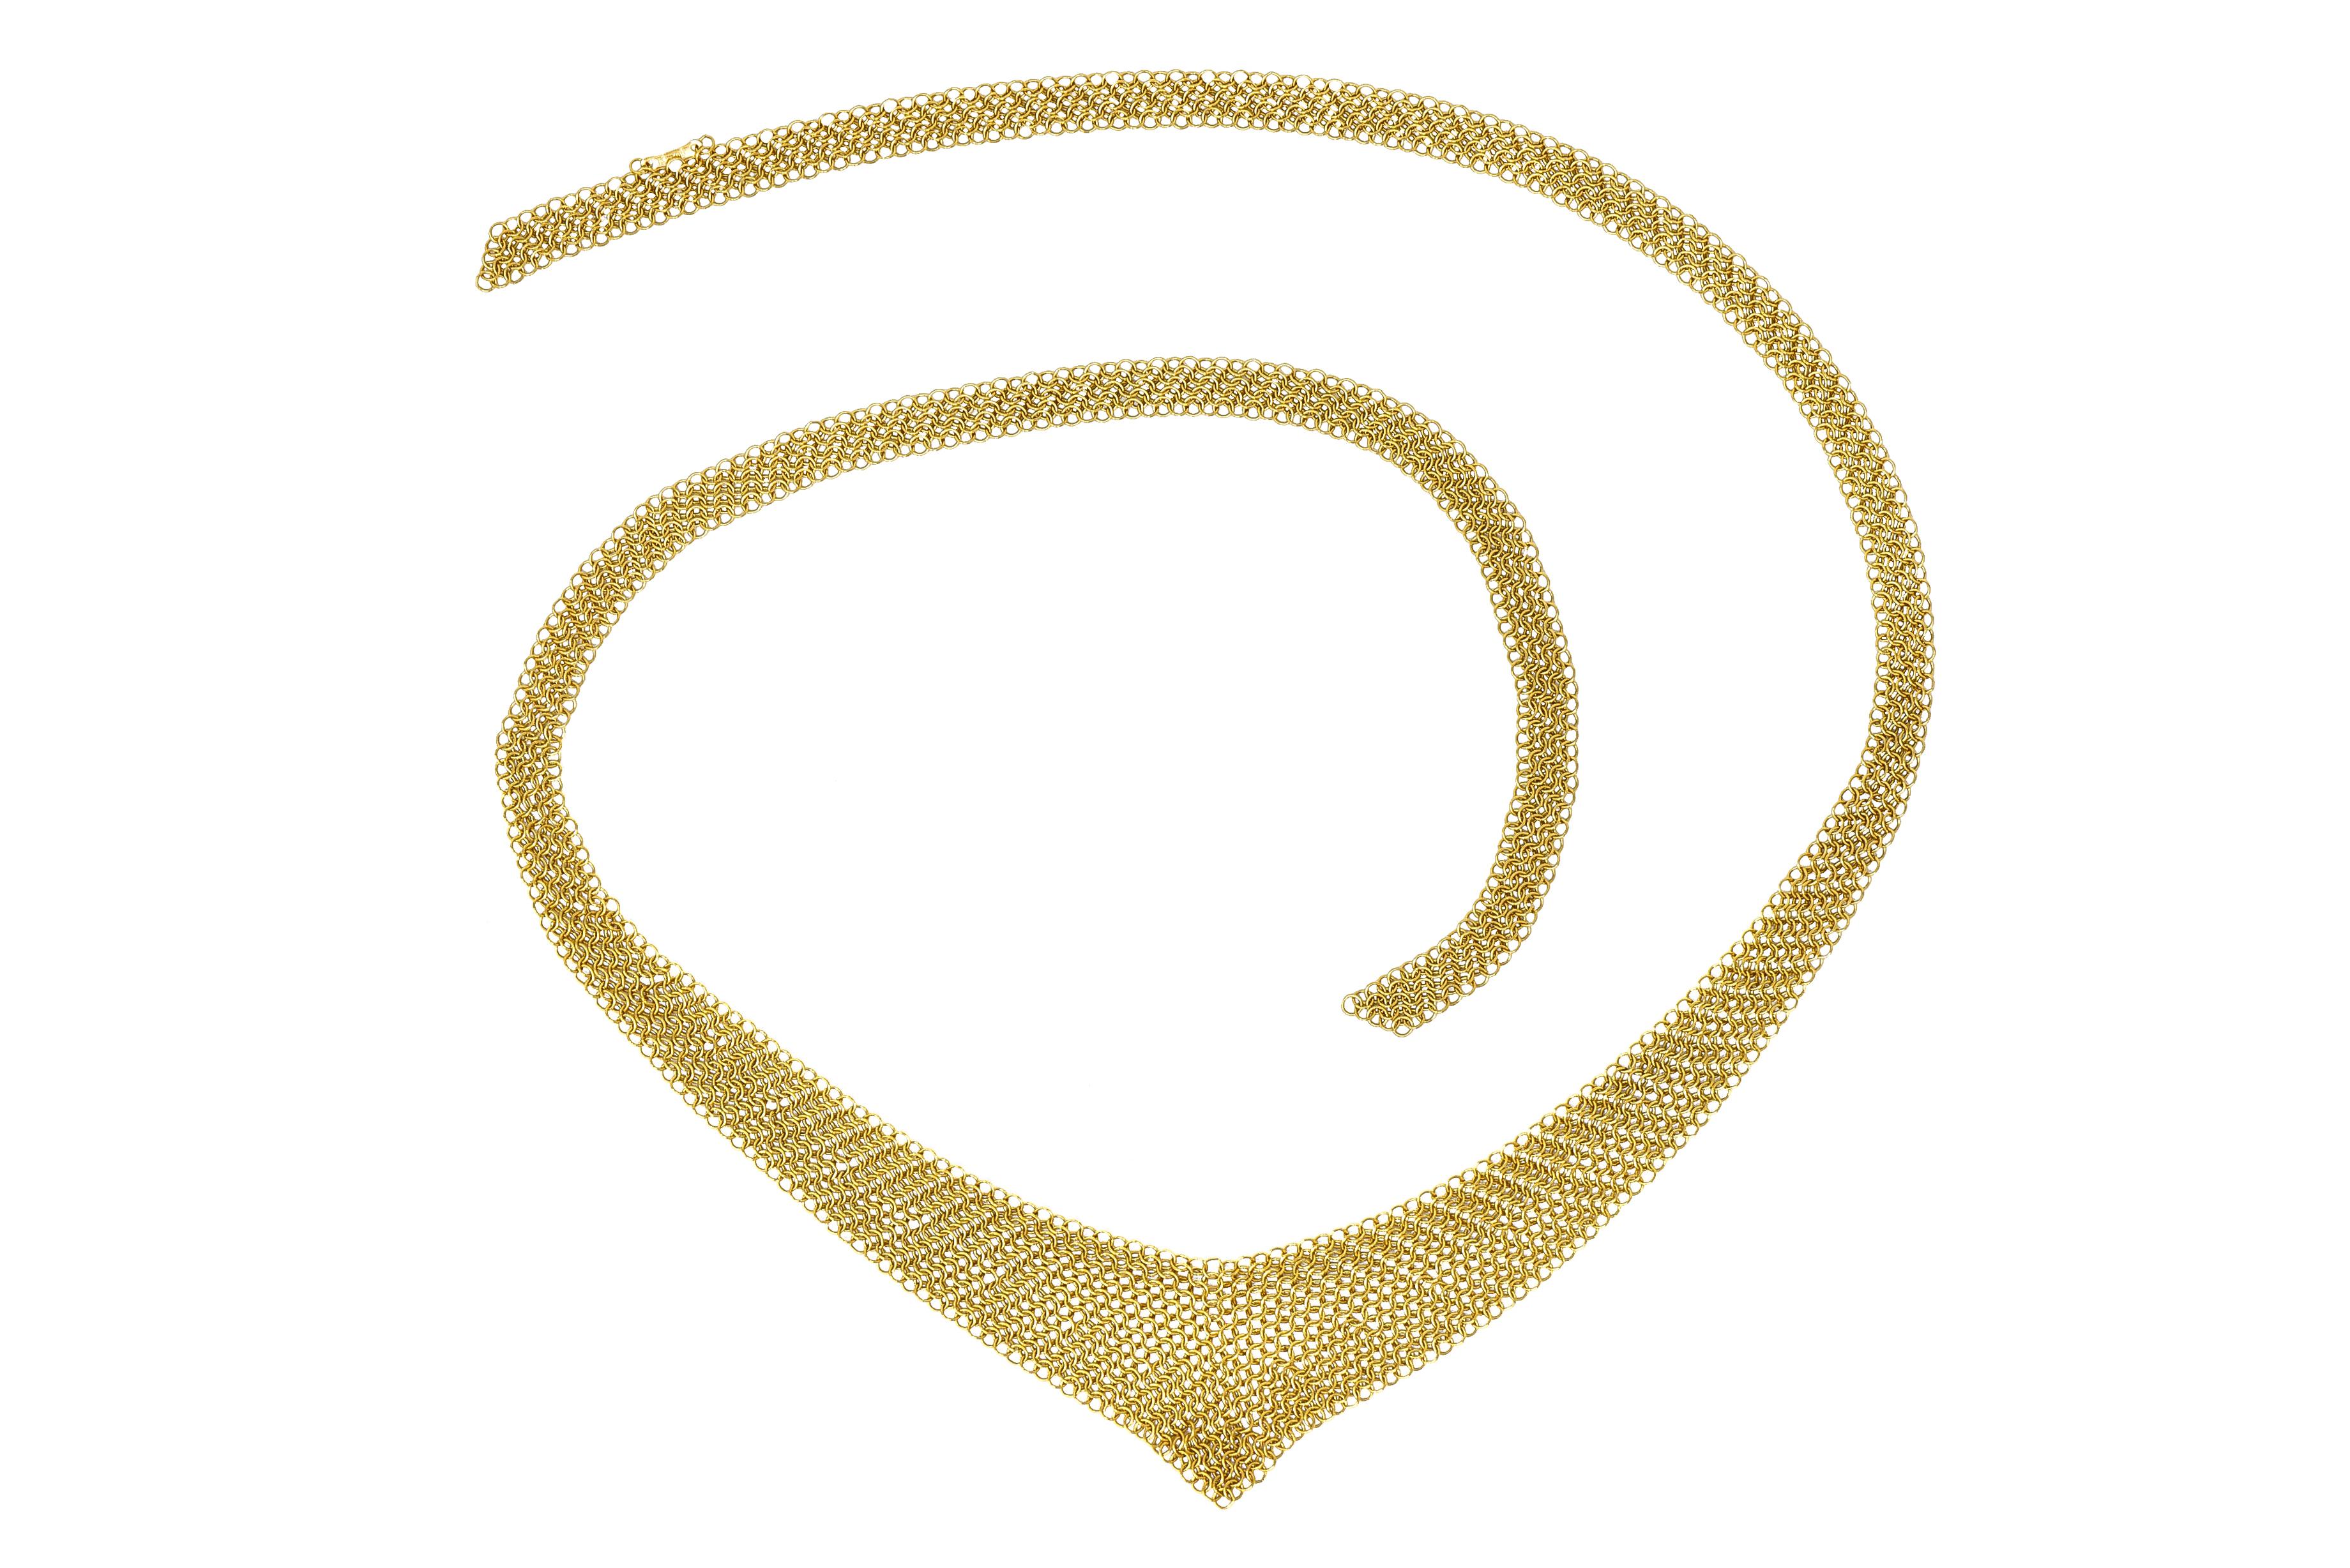 Scarf chain necklace is comprised of fine circular links woven together

Malleable mesh that graduates into a chevron point

Logo link is stamped 750 for 18 karat gold

Logo link is signed Peretti and T & Co.

Circa: 1990s

Length: 26 1/2